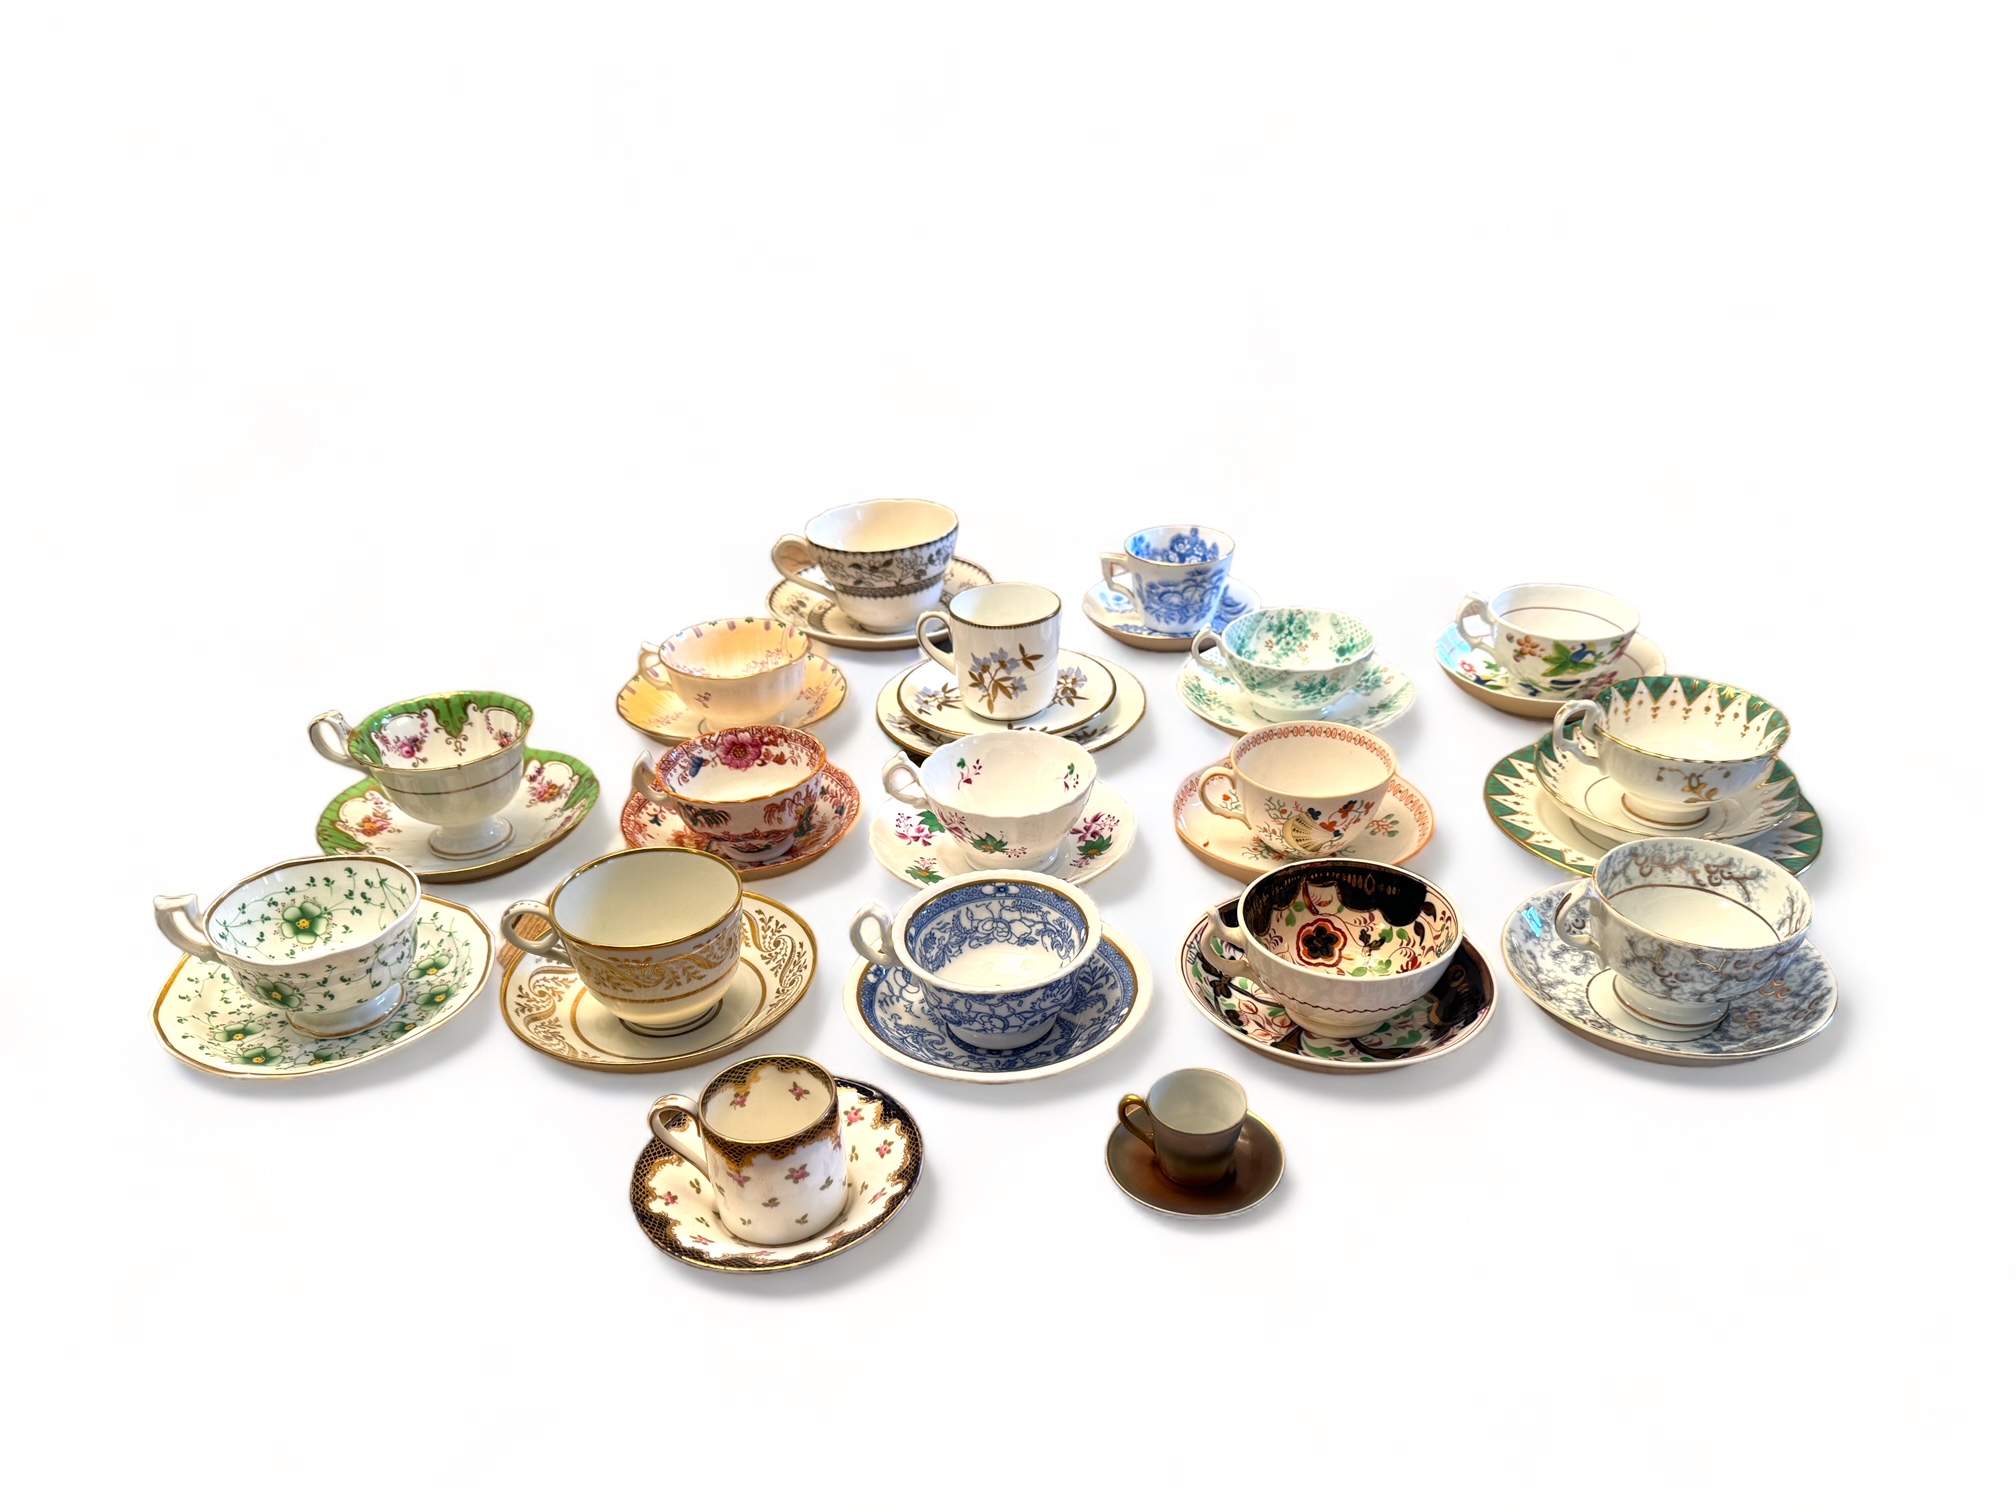 A collection of eighteen largely mid 19th century English porcelain cups and saucers